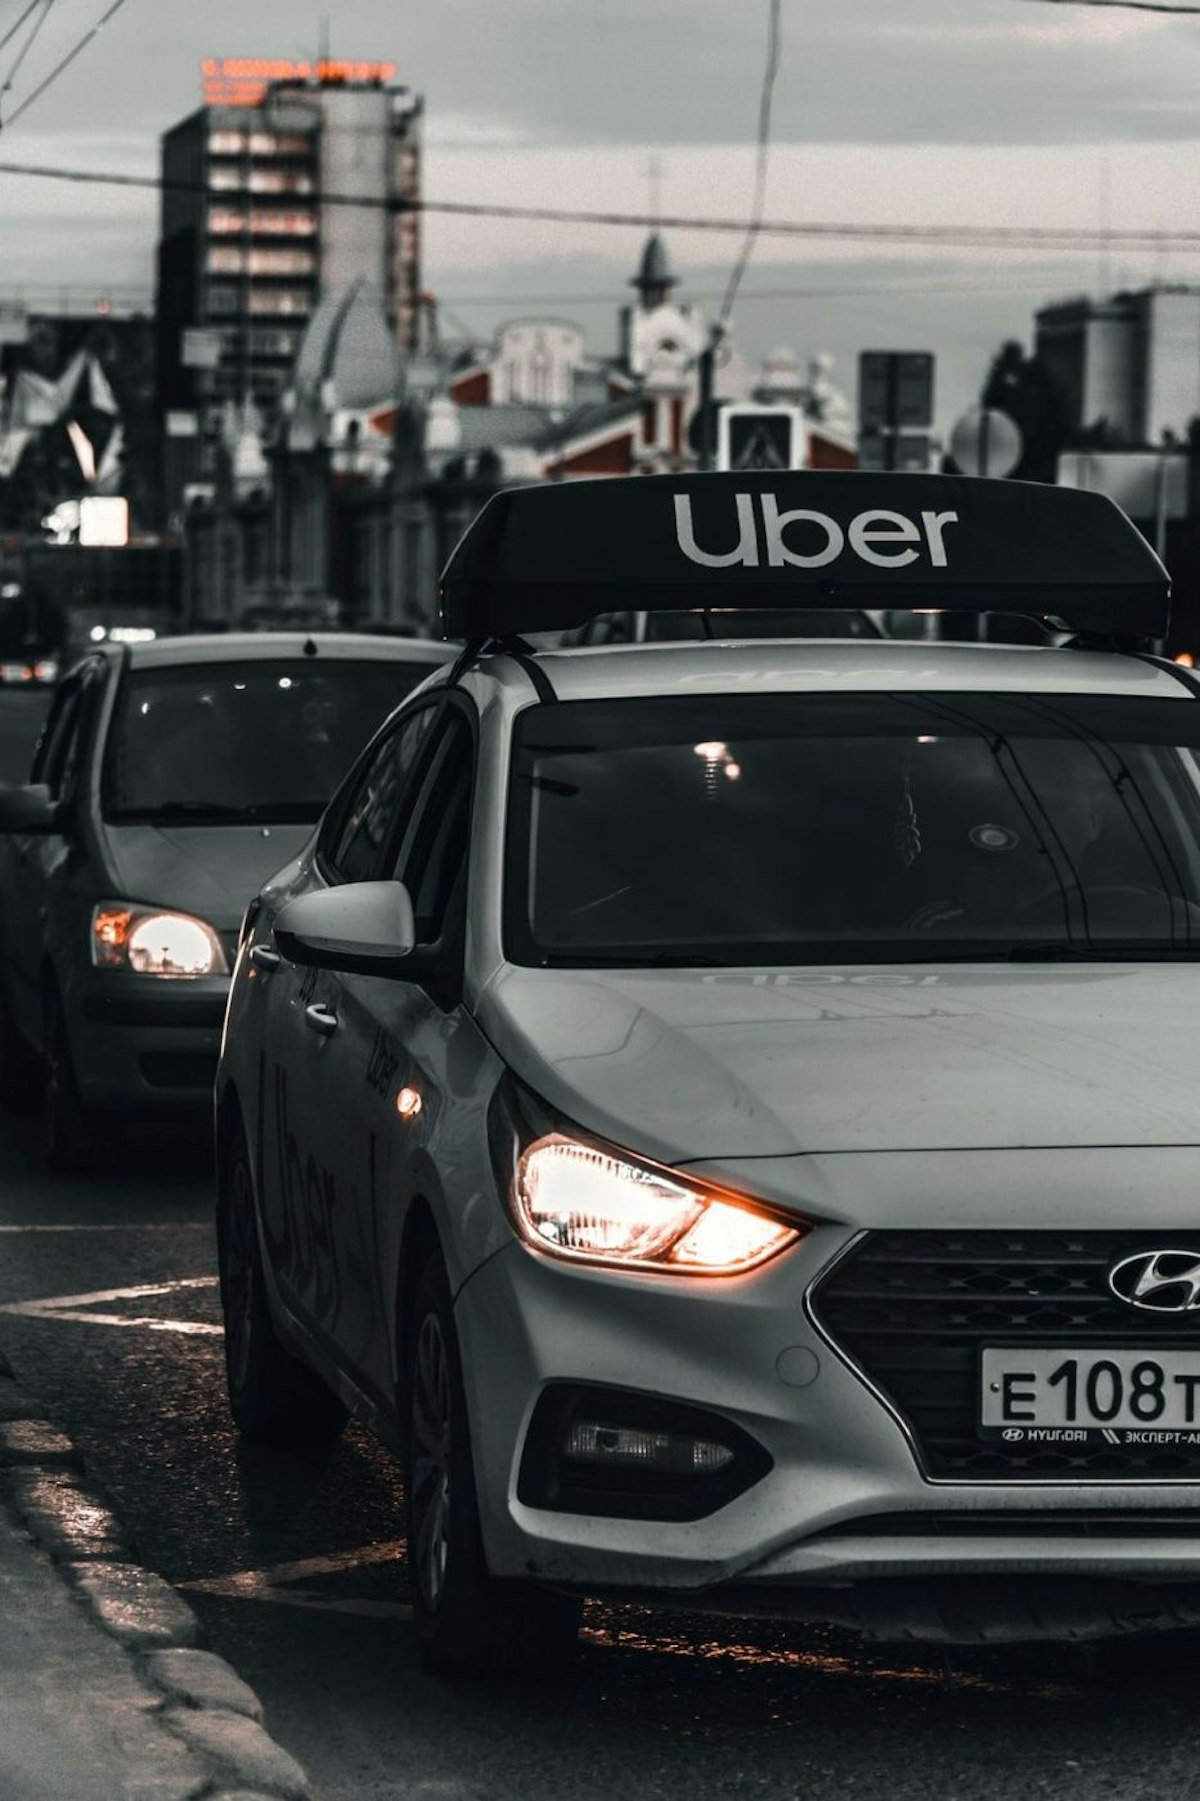 featured image - Using Machine Learning to Build a Ride Acceptance Model for Uber